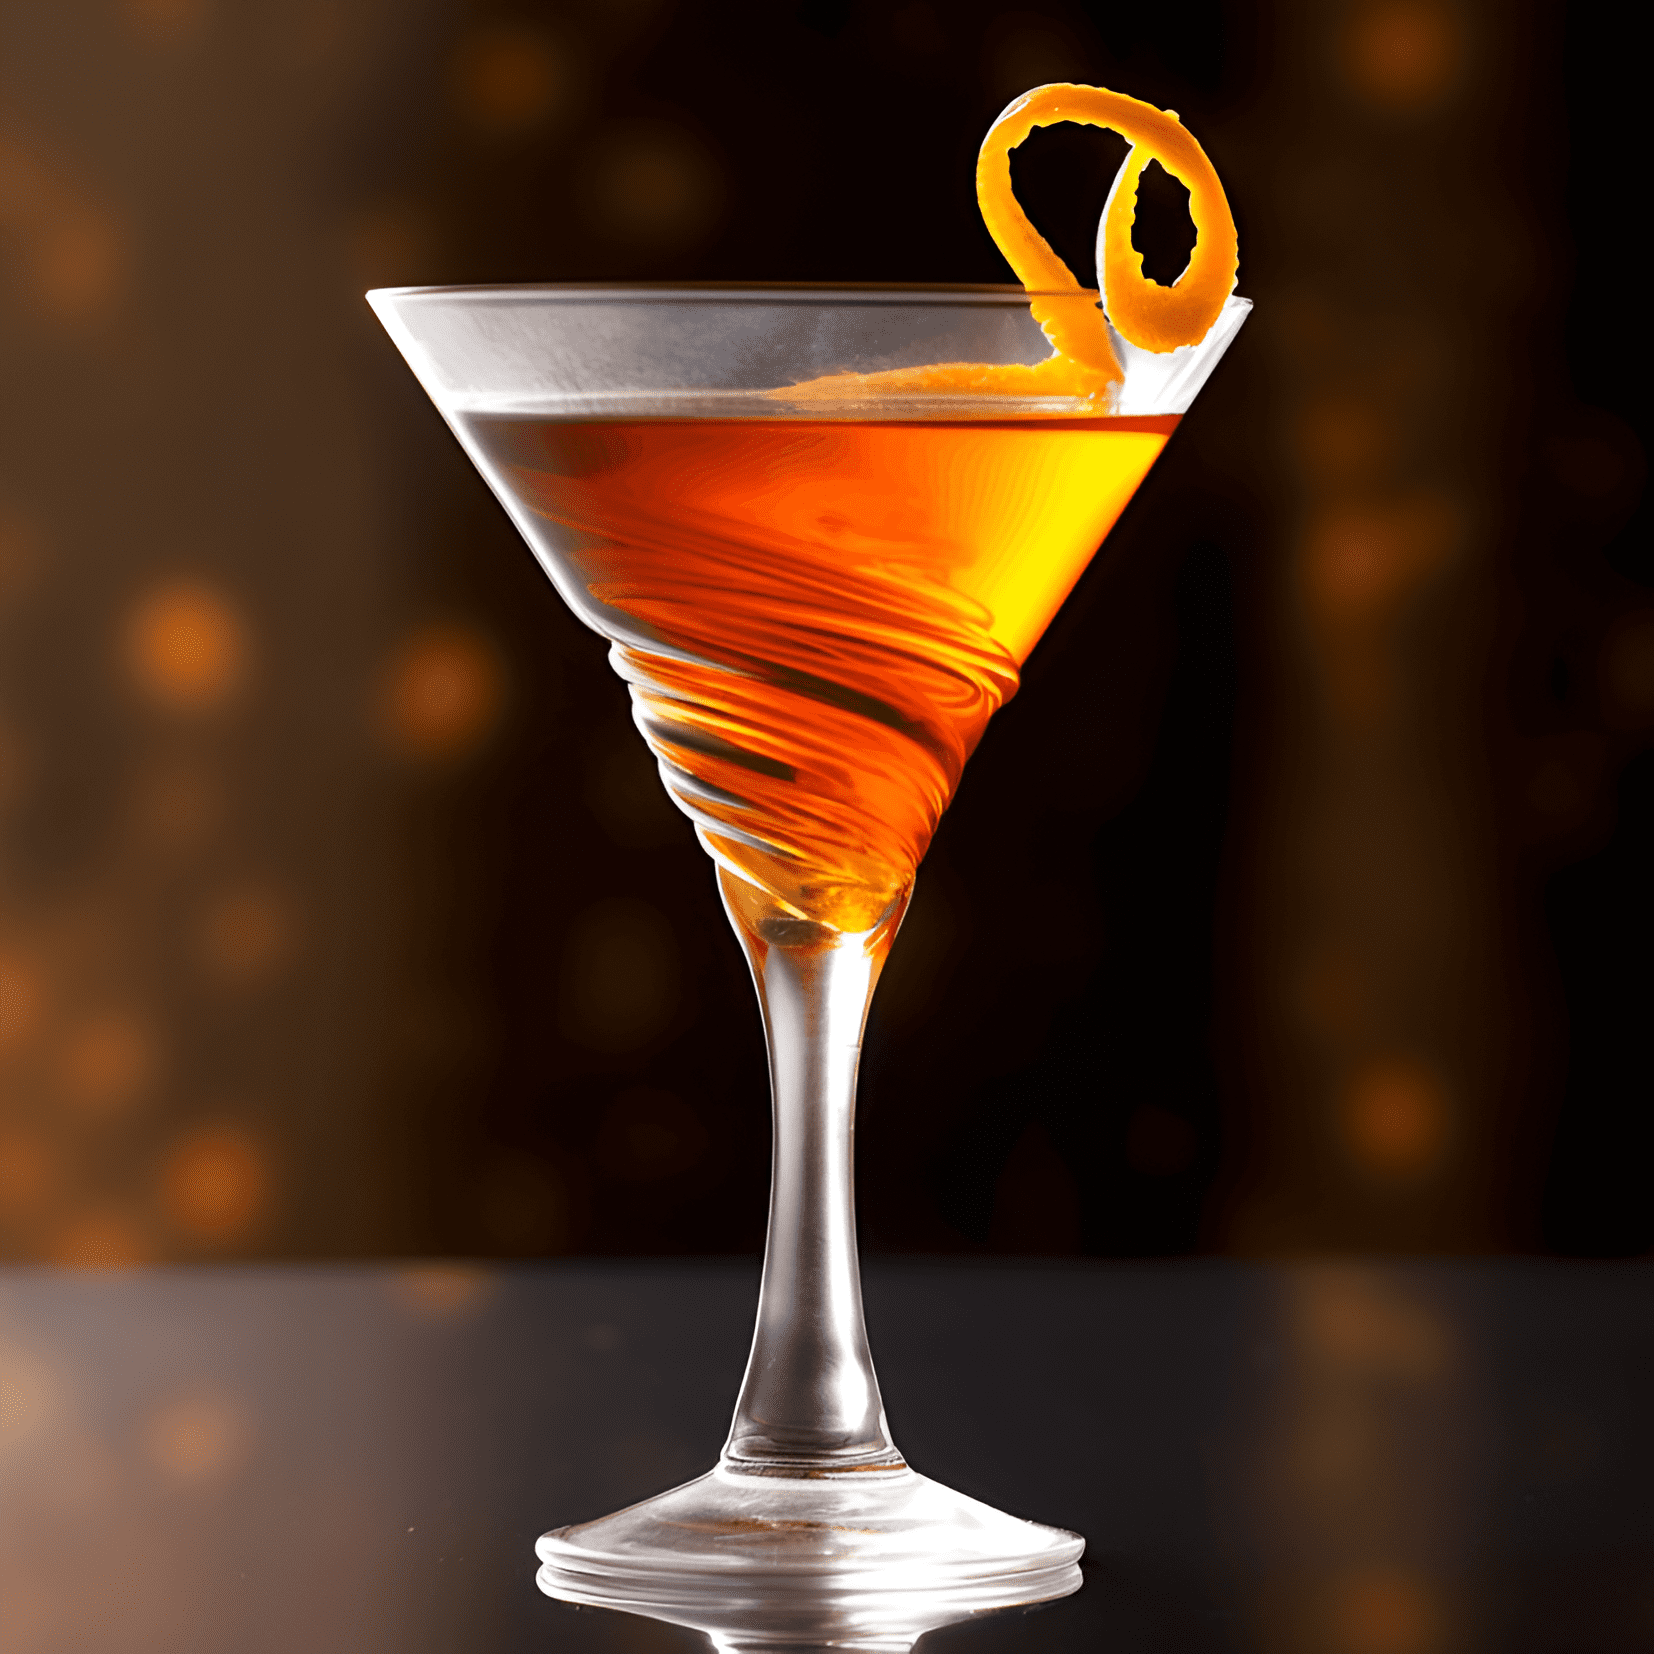 Olympic Cocktail Recipe - The Olympic cocktail has a refreshing, citrusy taste with a hint of sweetness. It is well-balanced, with a slightly tart edge from the orange juice and a smooth, velvety finish from the brandy. The cocktail is light and easy to drink, making it perfect for a warm summer day or a celebratory toast.